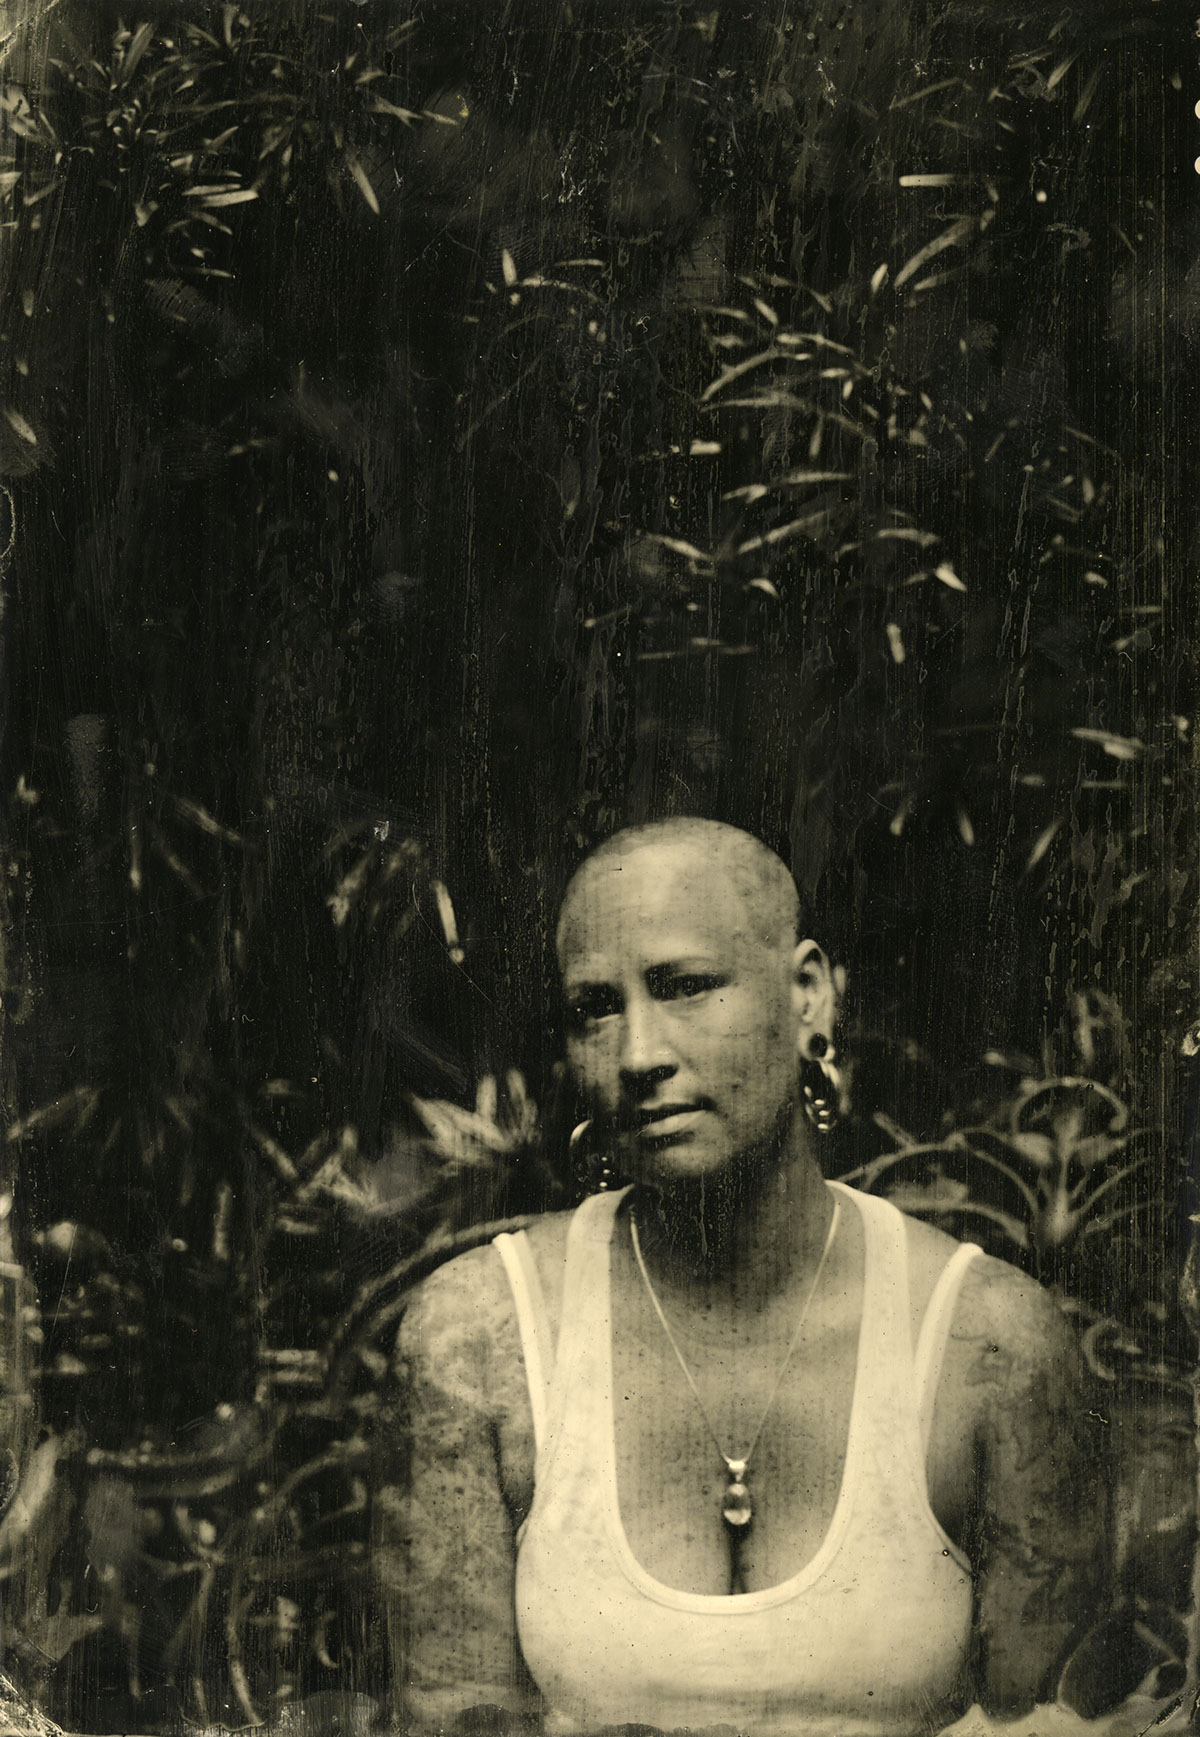 tintype wet plate 5x7 large format southern Georgia Savannah Documentary  collodion